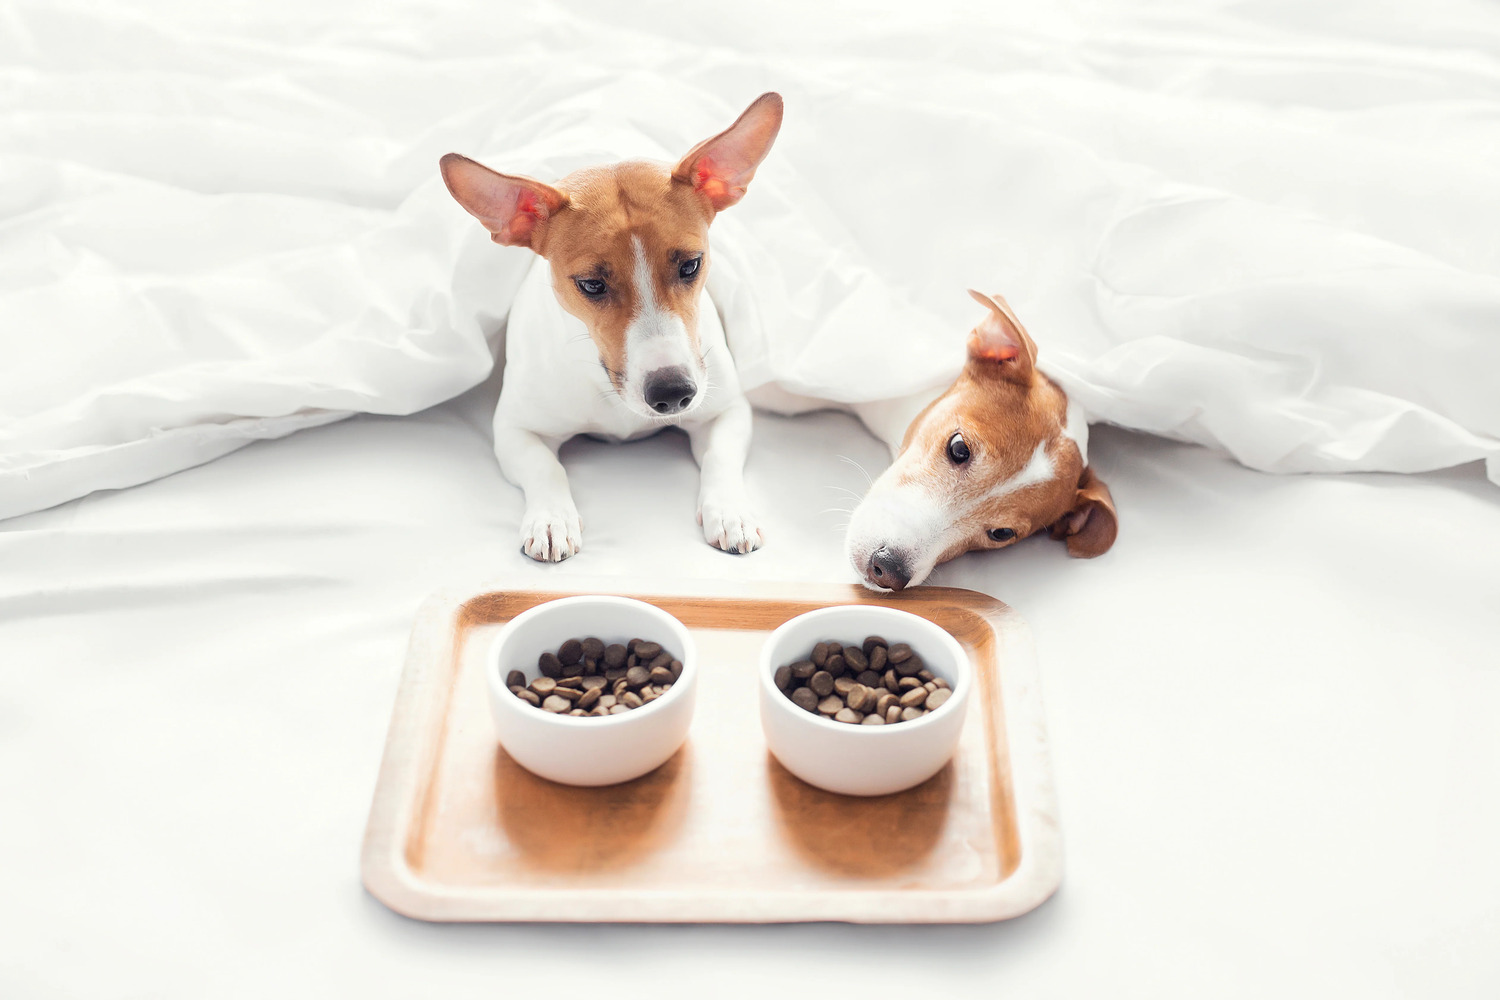 Which Dog Foods Cause Cancer